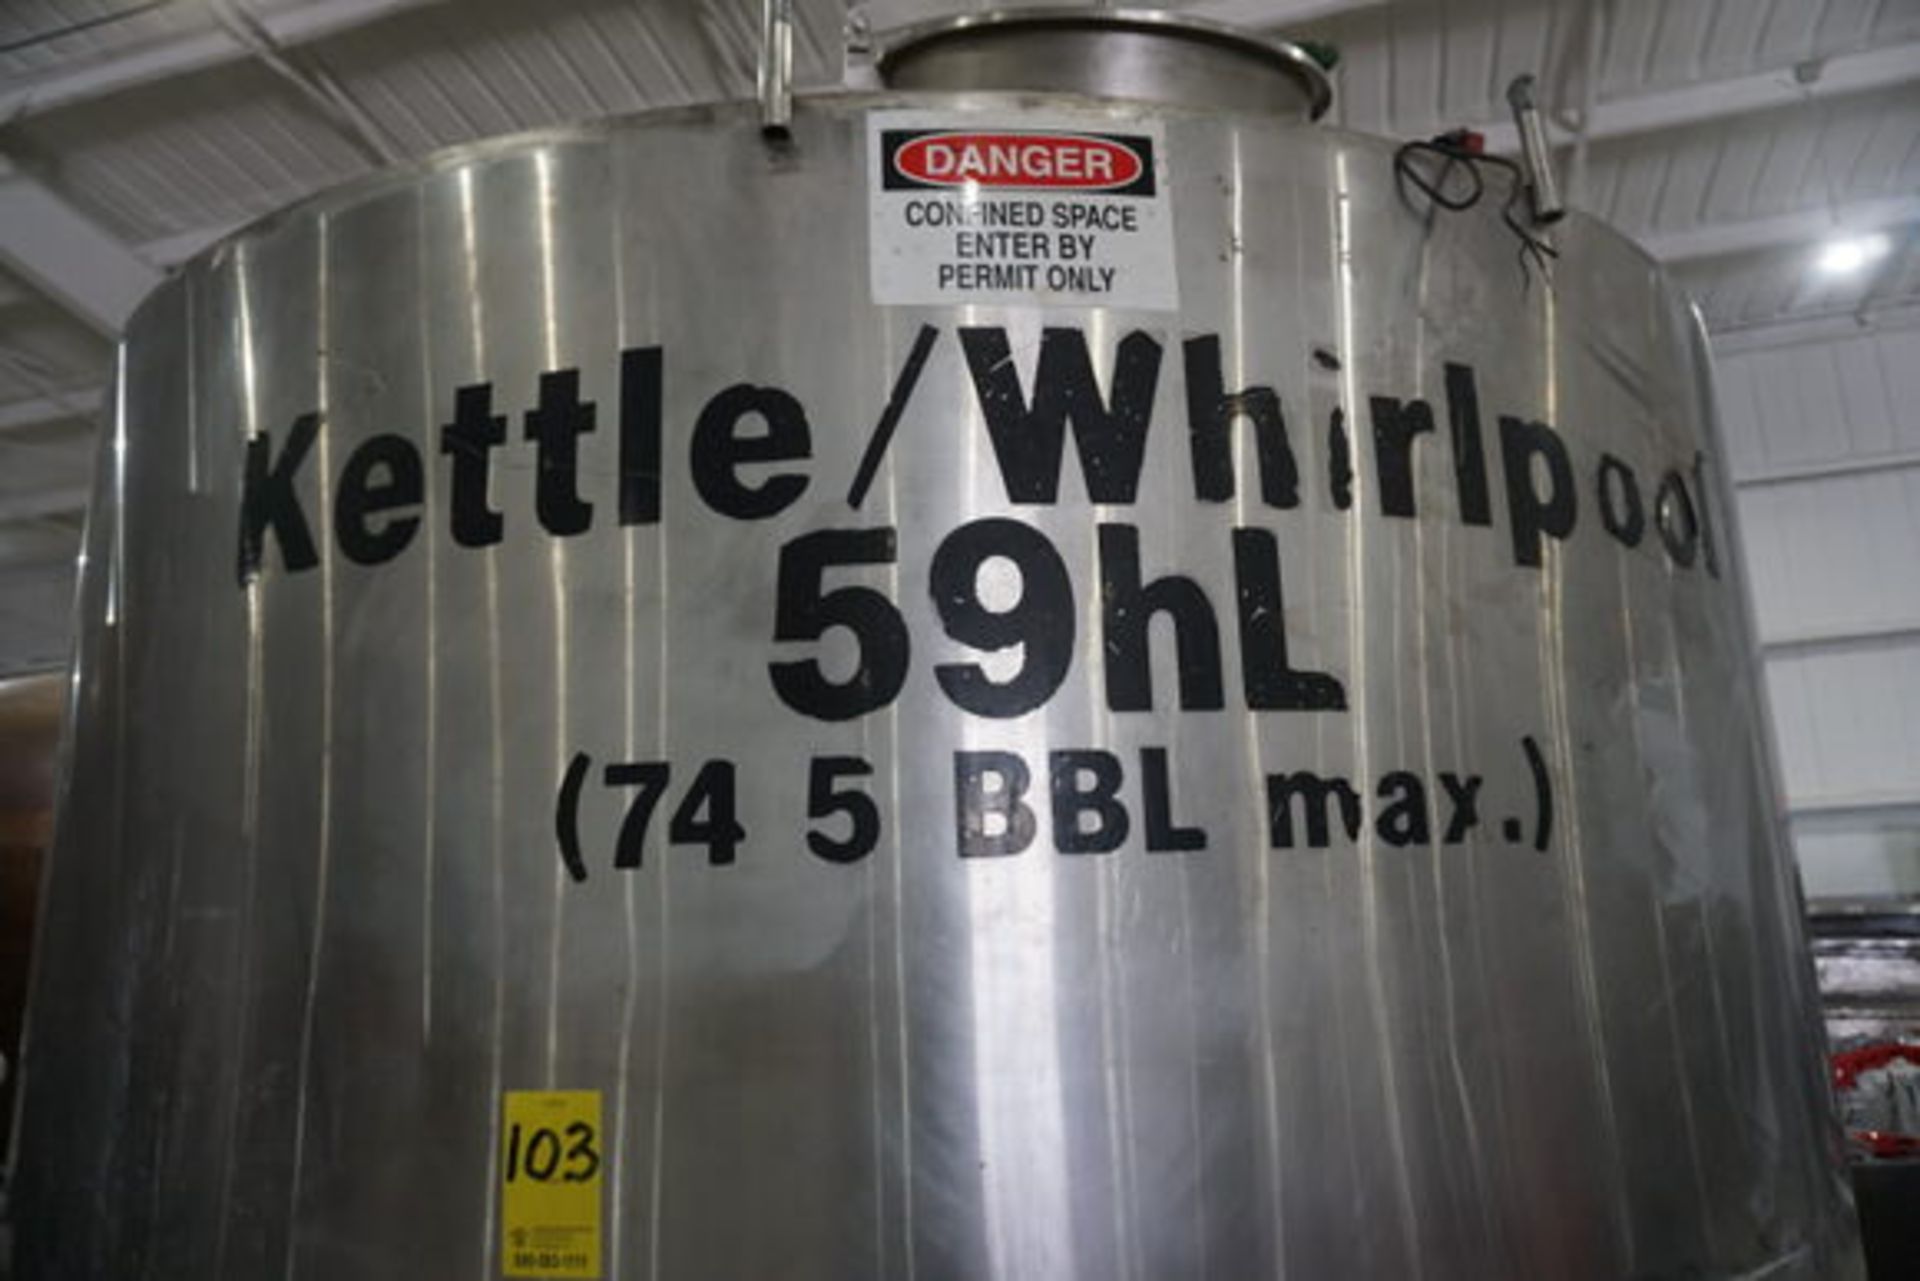 Stainless Steel Mixing Kettle/ Whirpool Tank, 59HL, 745 BBL Max Cap (LOCATION: ROME, TX) - Image 10 of 10